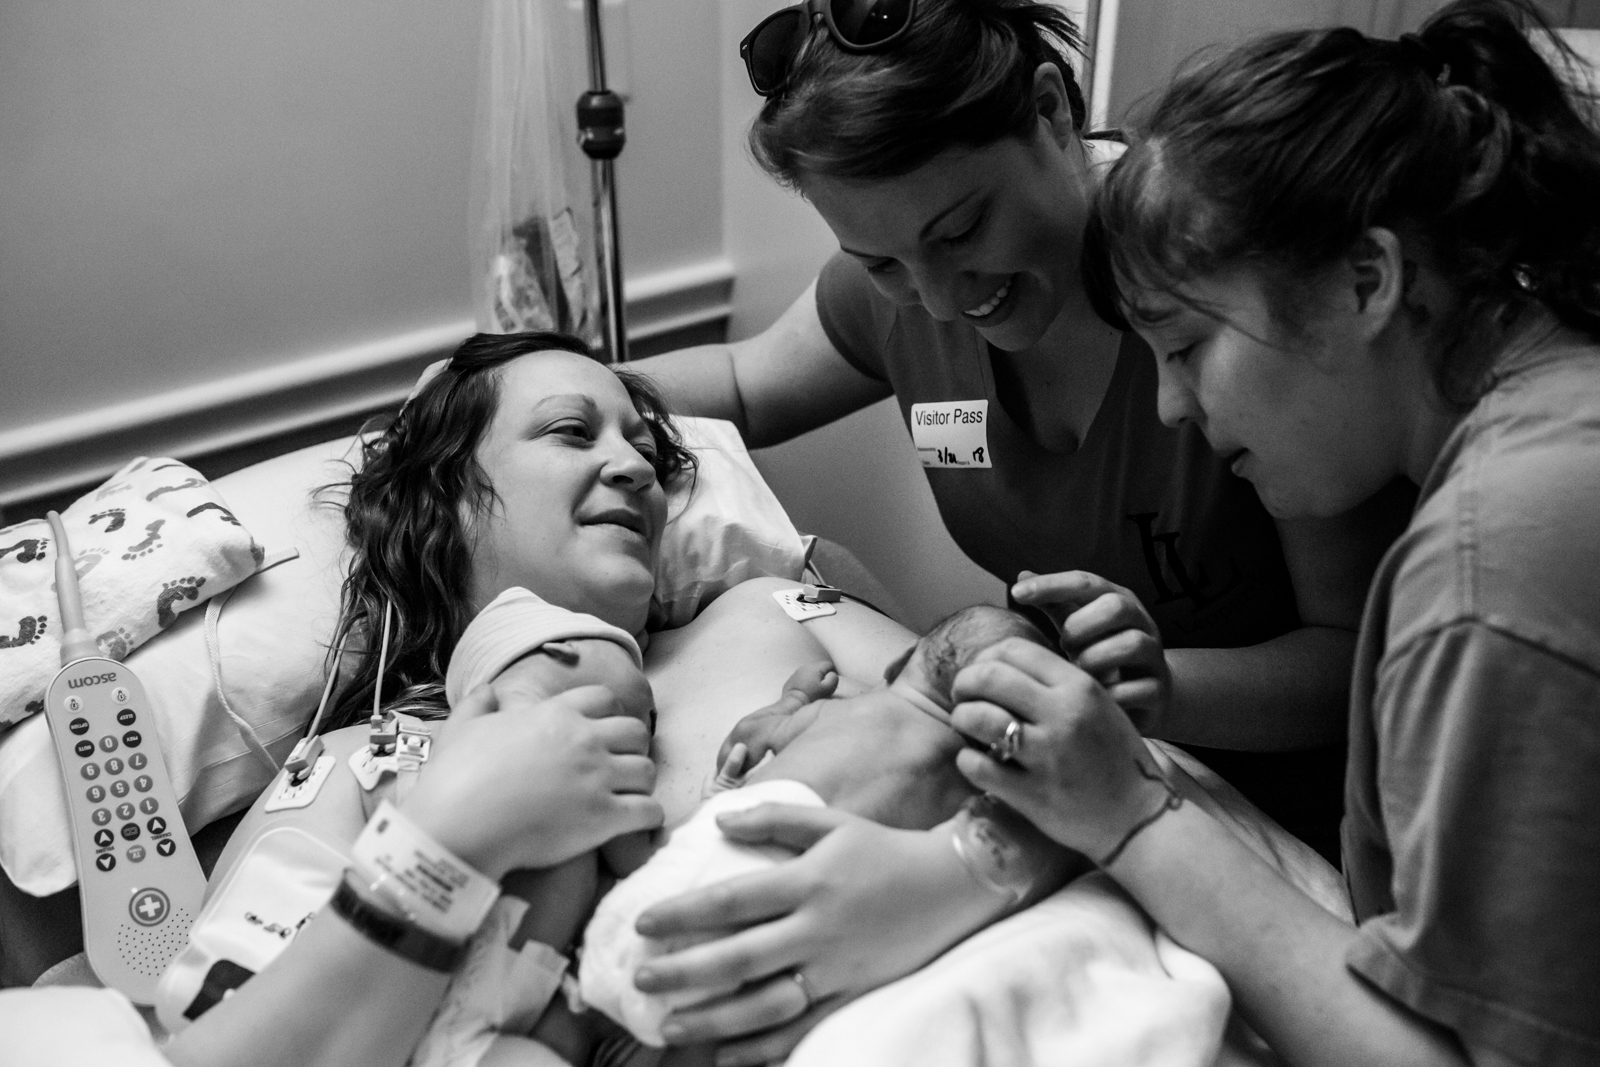 twin sisters meet their twin nieces for the first time